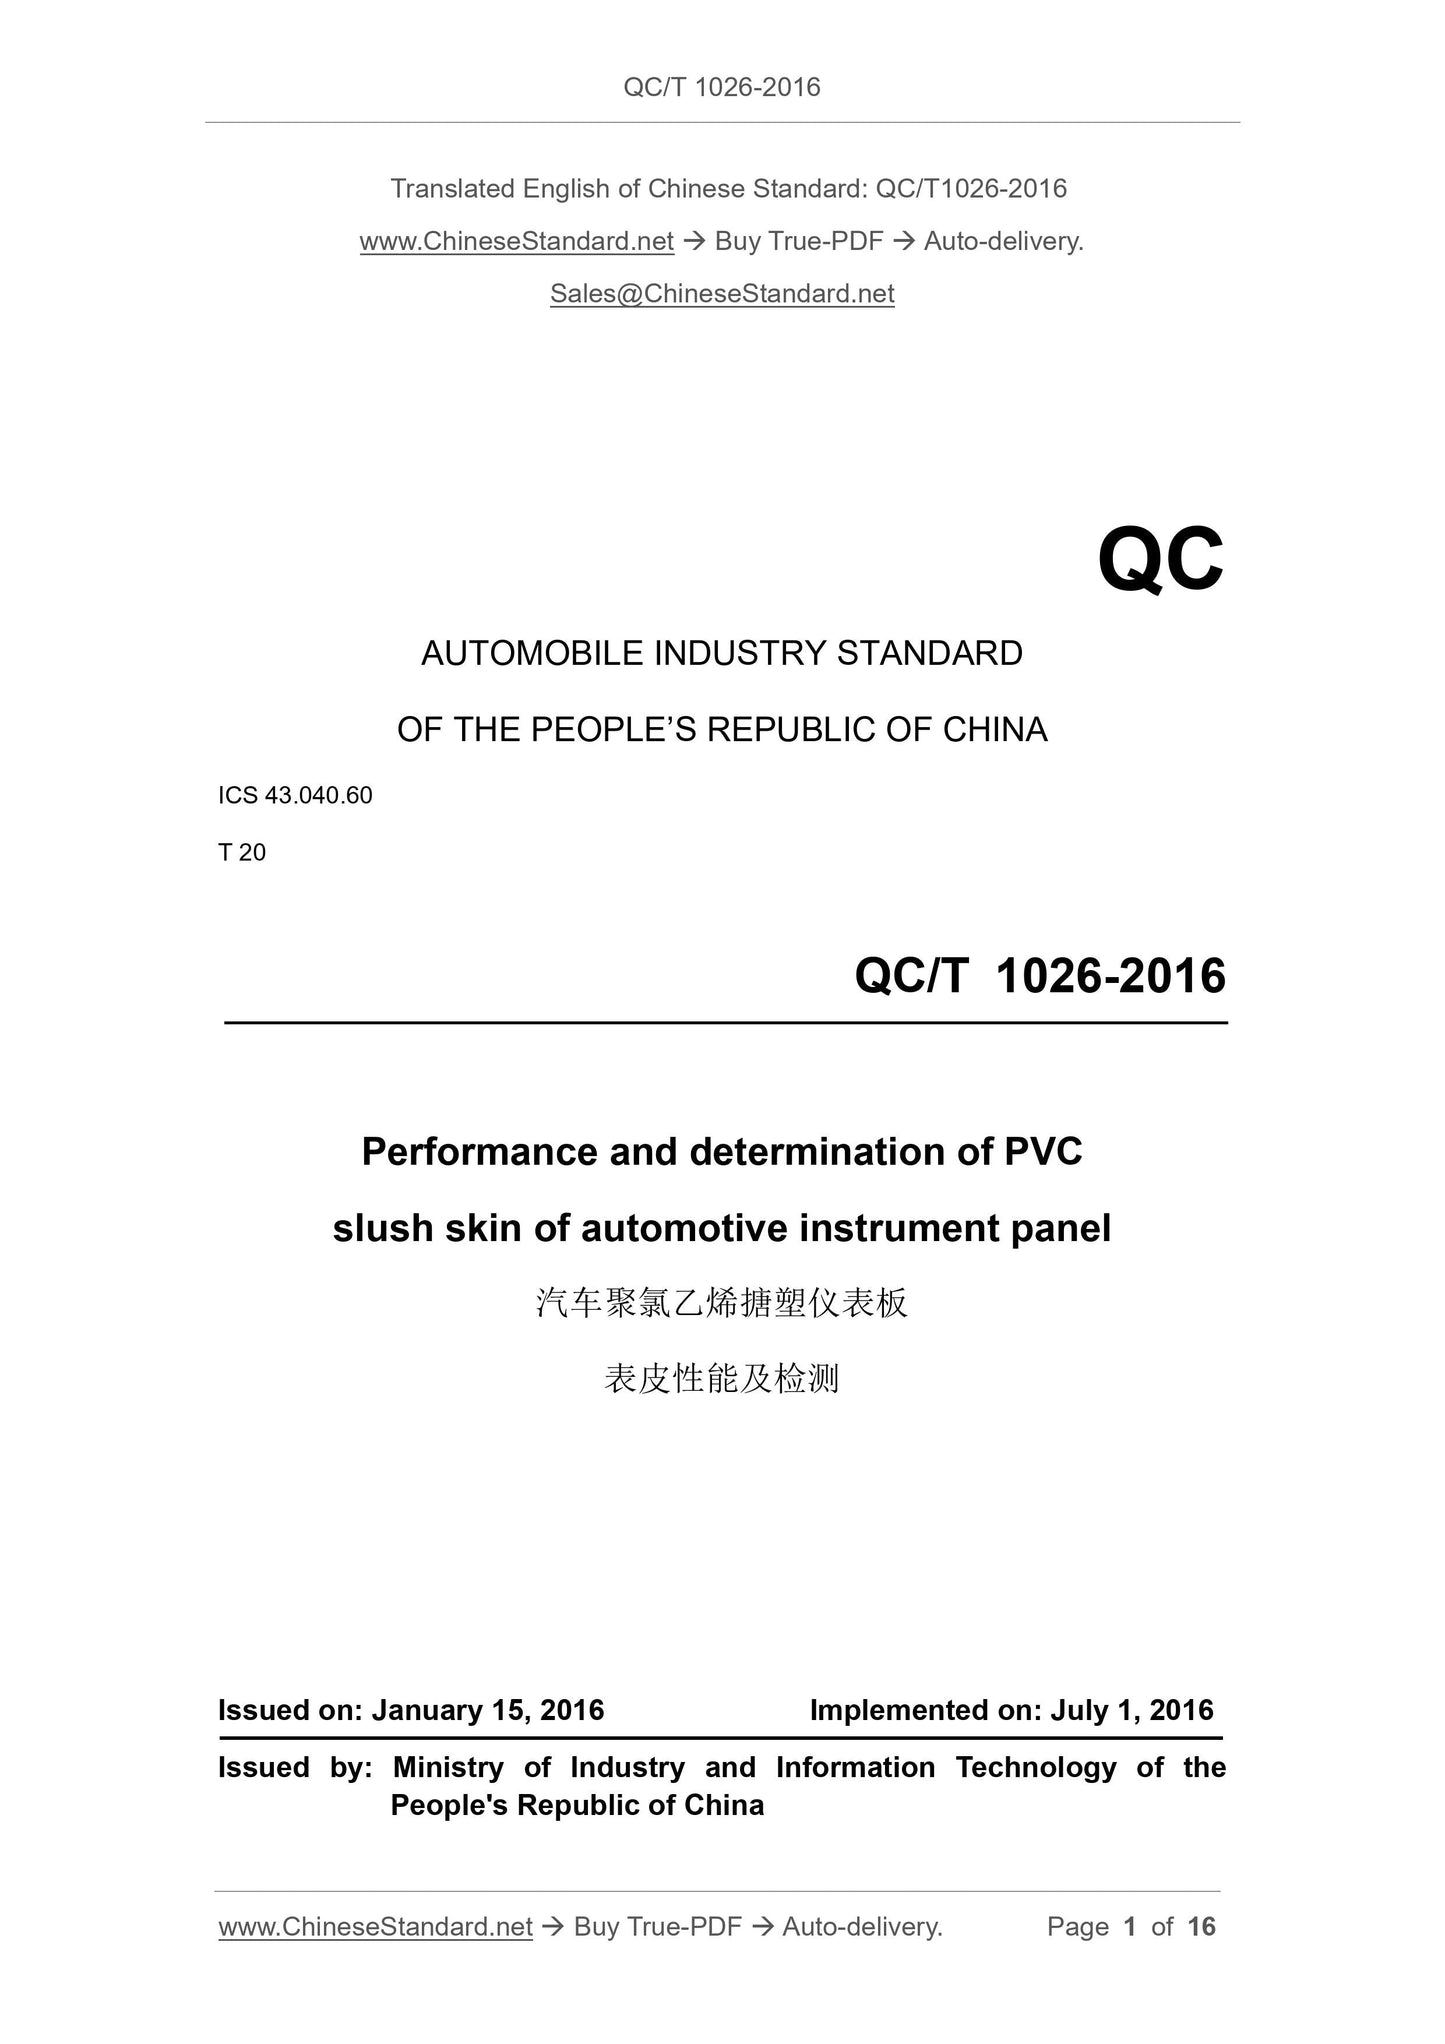 QC/T 1026-2016 Page 1